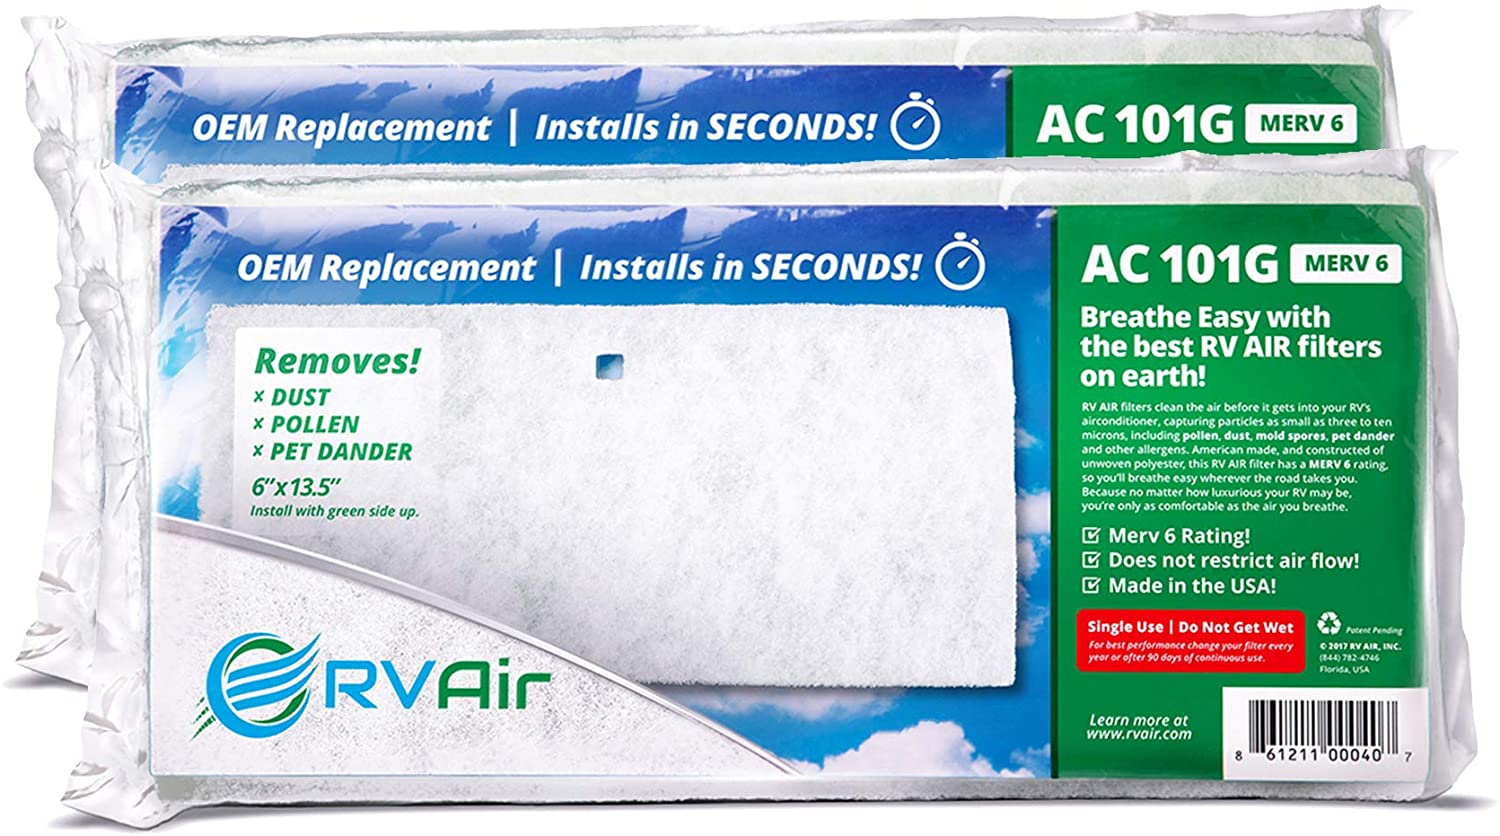 RV Air RV AC Filter | 2 Filters AC 101G Air Filters for RV Air Conditioner | Made in USA RV Filter to Replace Standard RV Air Conditioner Filters for Better Airflow and Cleaner Air | MERV 6 Rated